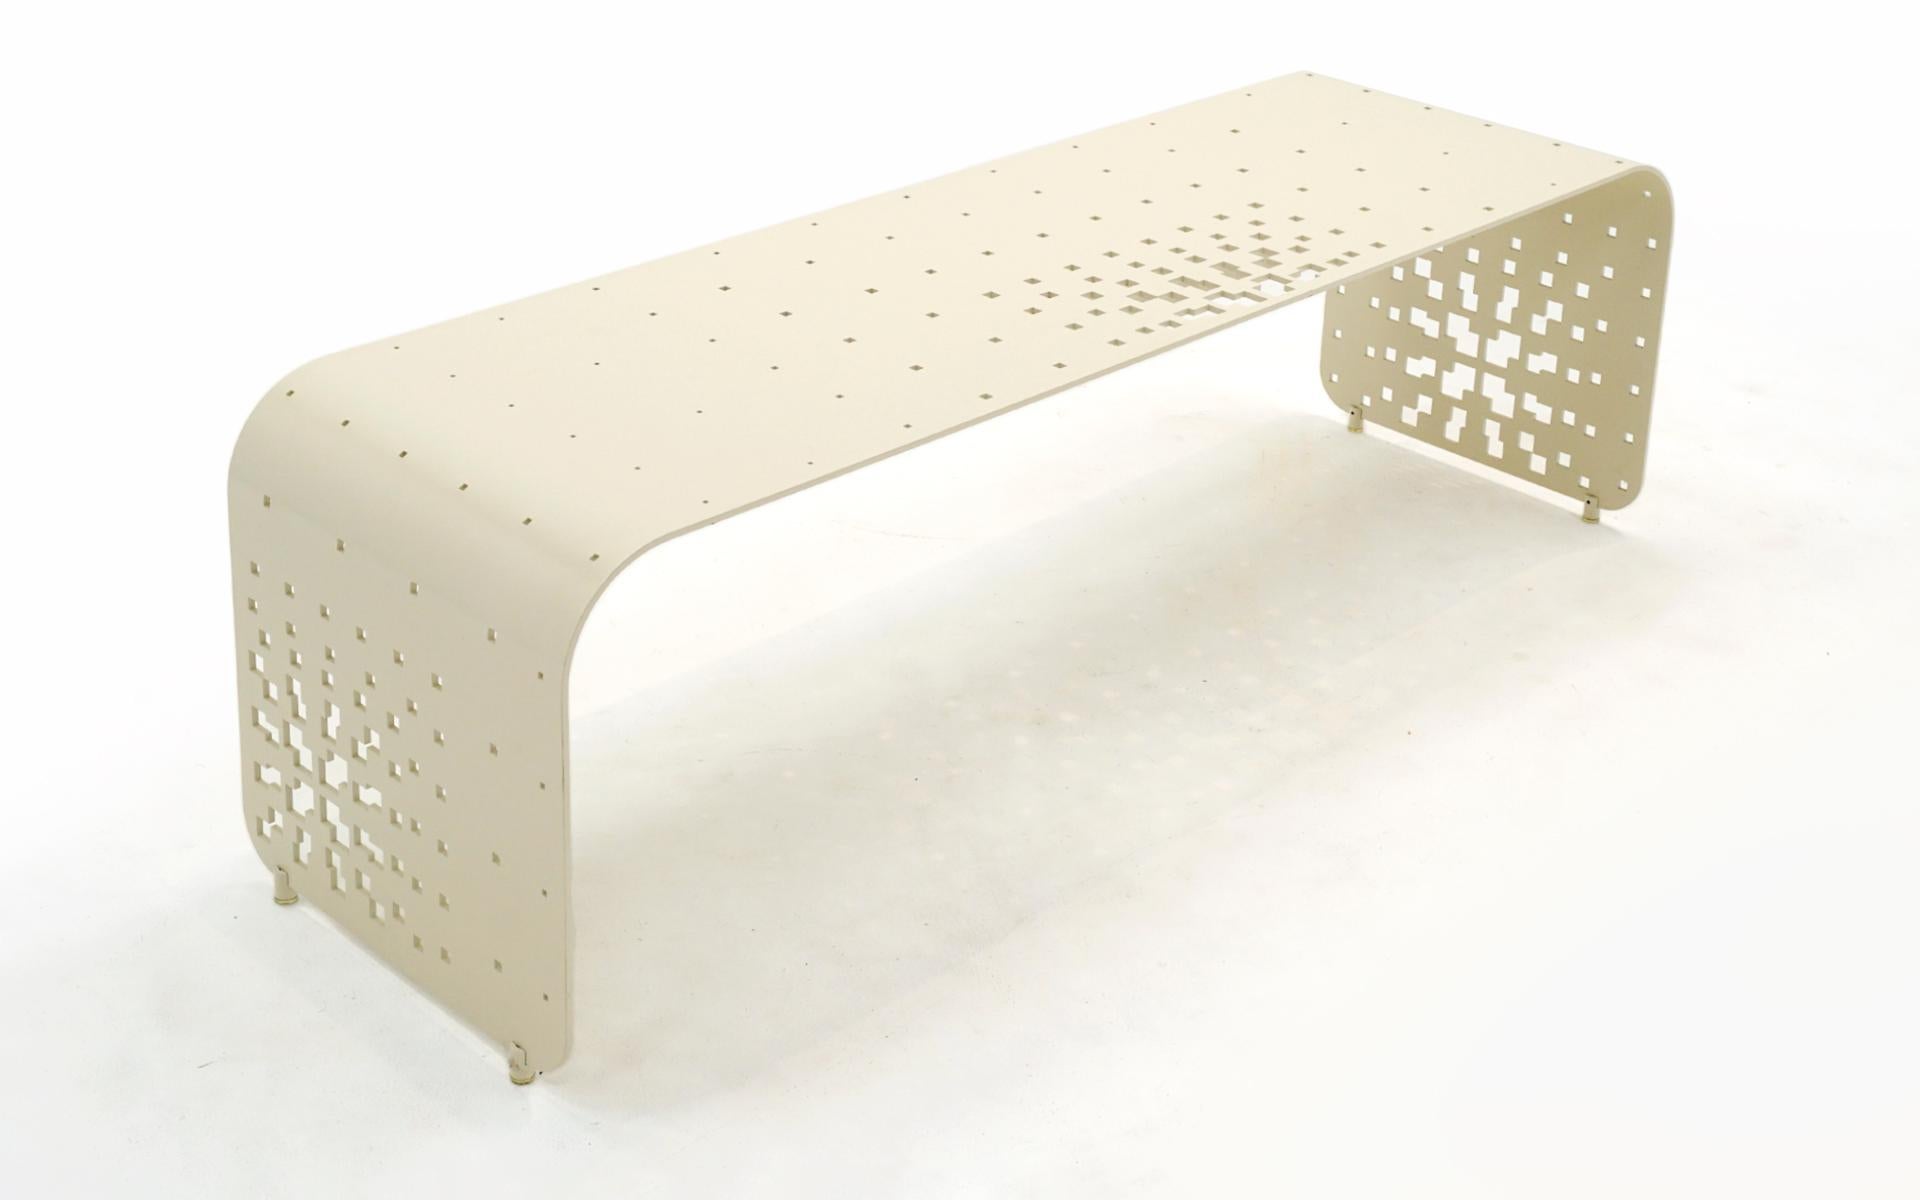 Modern Bench / Coffee Table in Off White / Ivory by Yves Behar for Orange 22